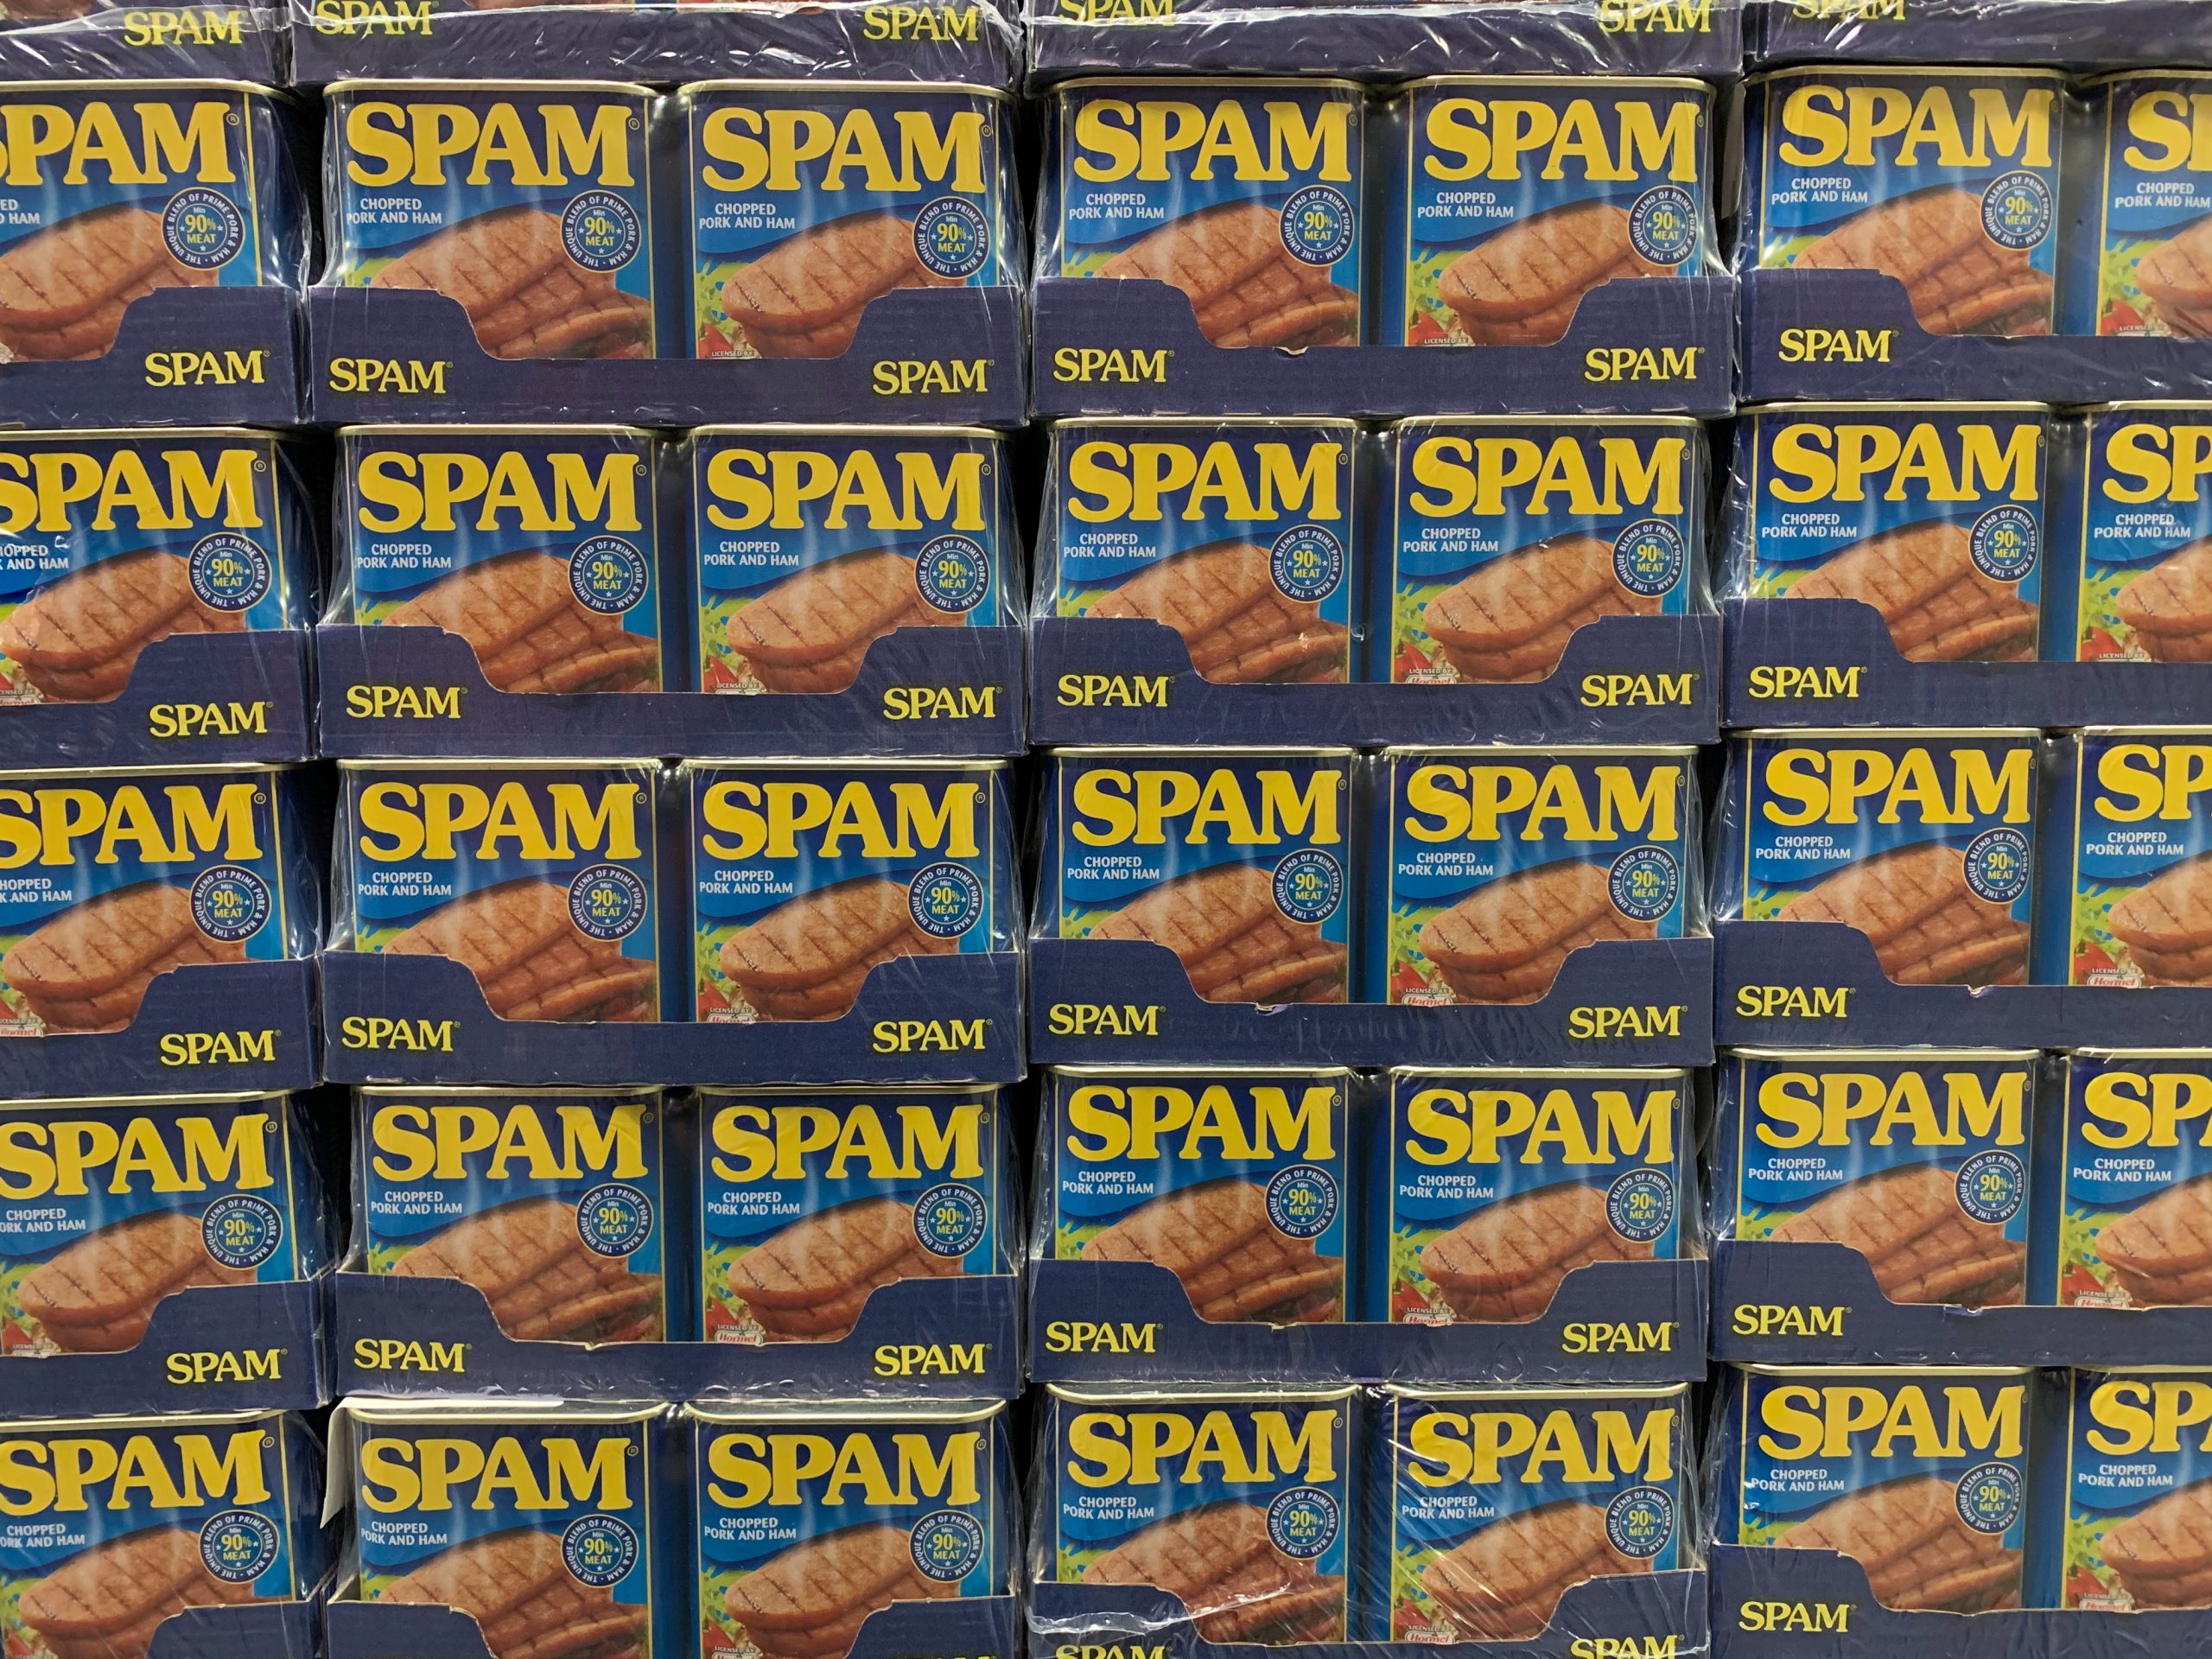 picture of spam containers stacked up